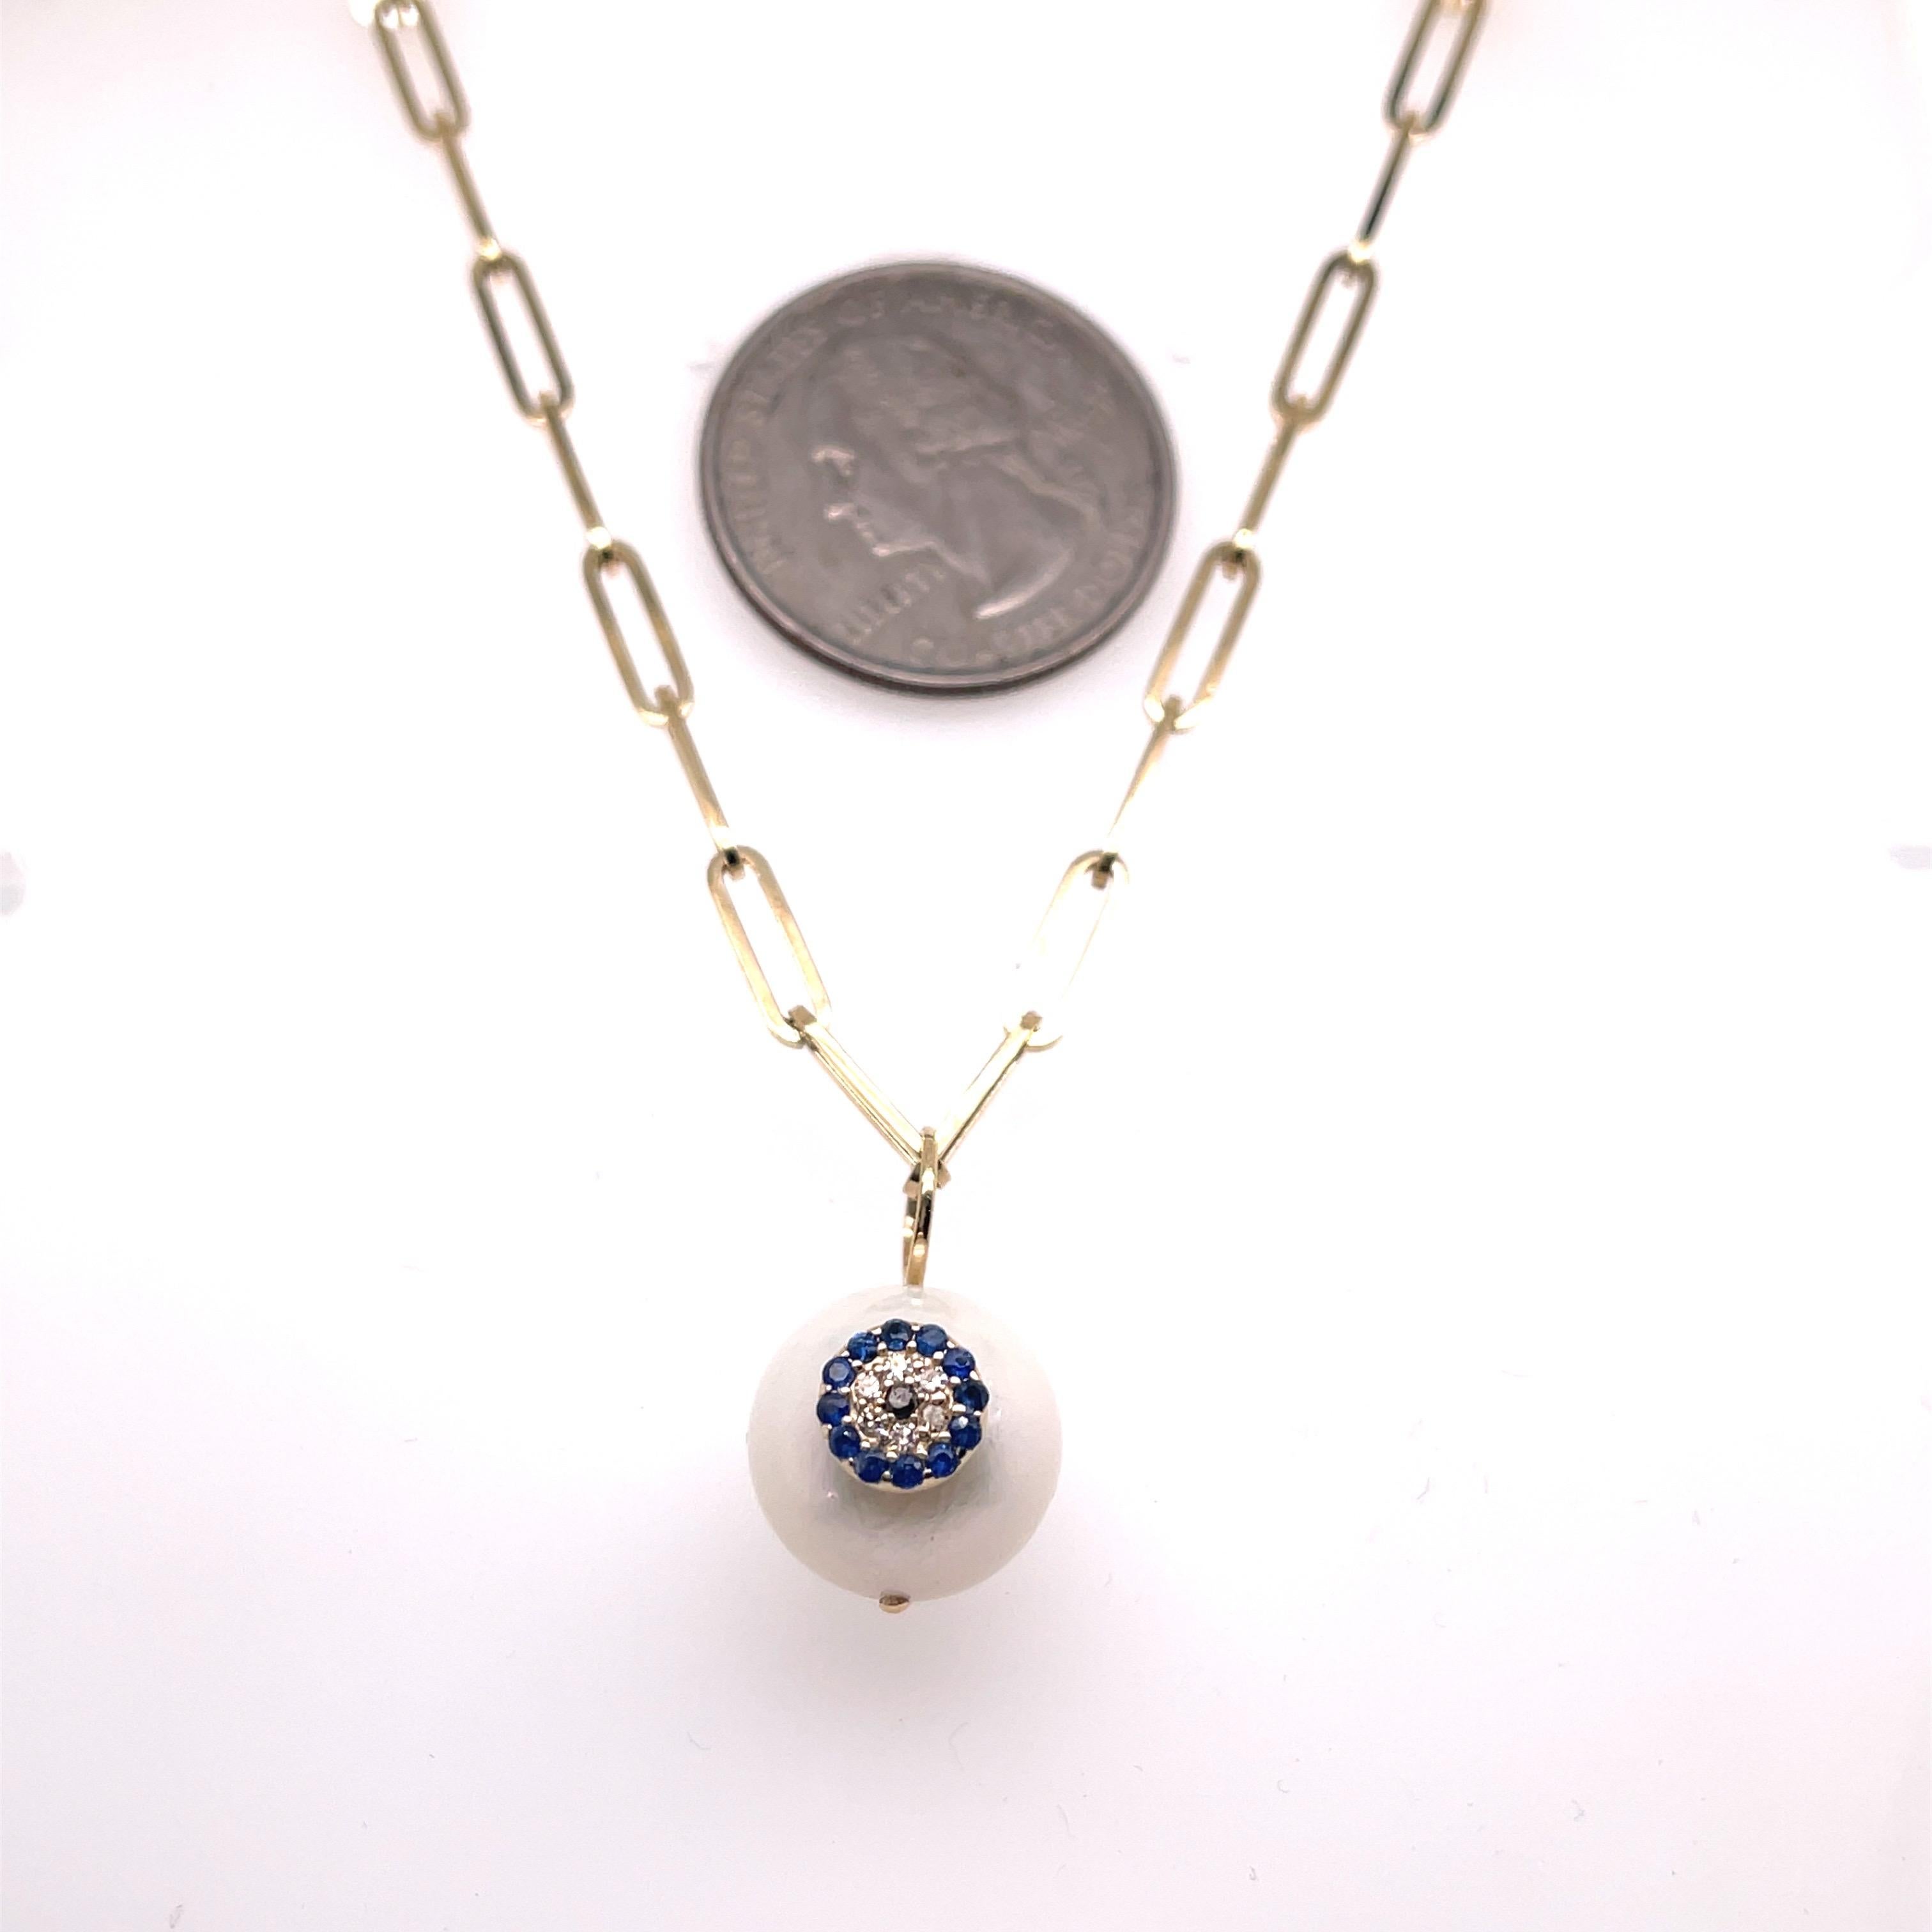 Paper link Necklace 2.80 g.
Pearl charm with white and blue sapphire